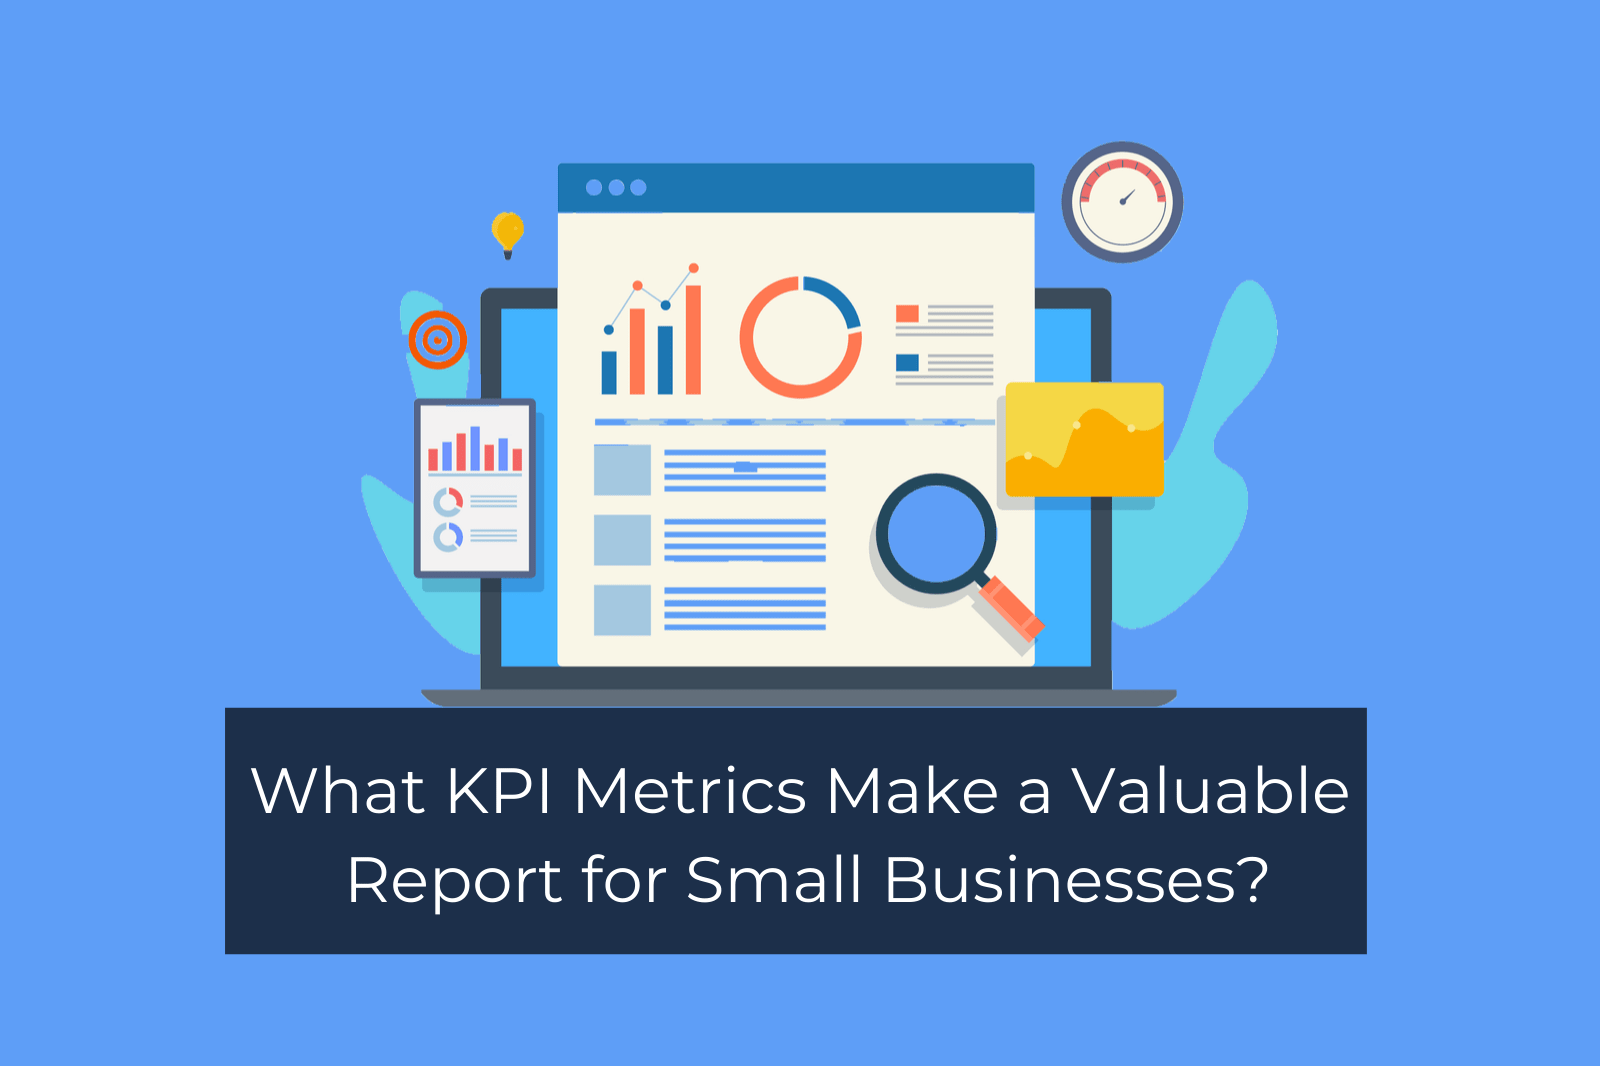 What KPI Metrics Make a Valuable Report for Small Business?